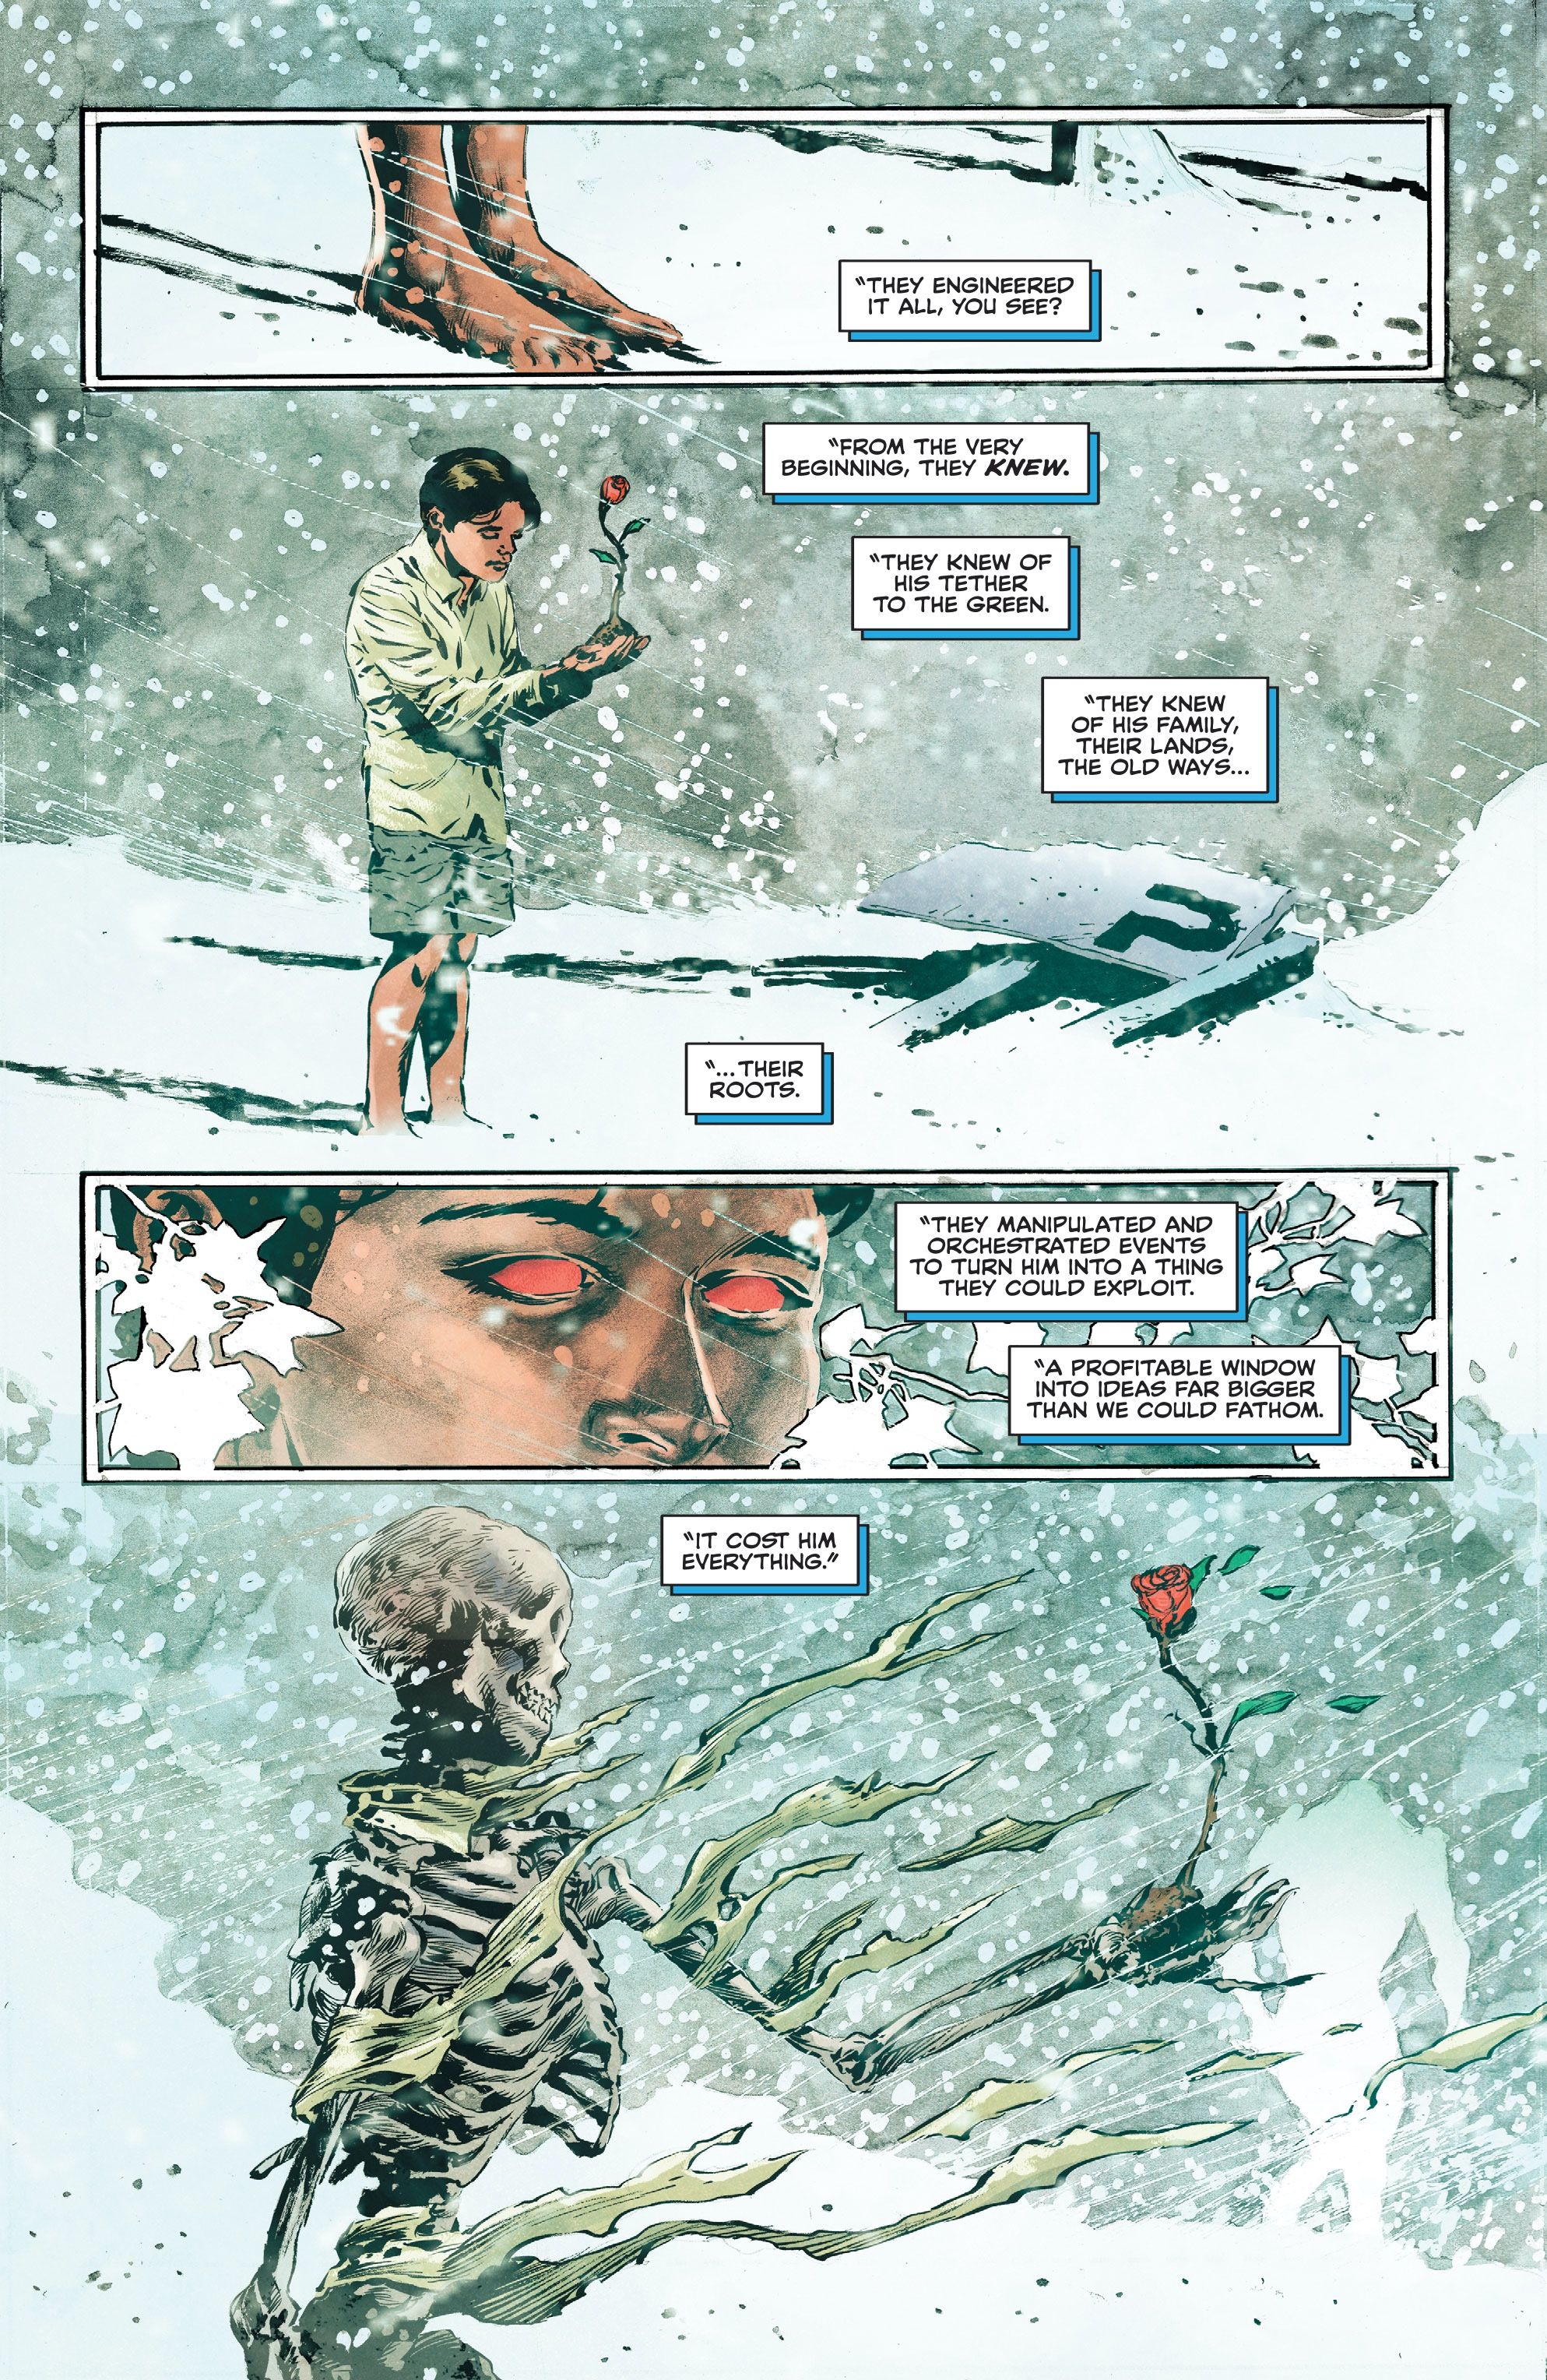 The Swamp Thing 11 Preview Page 1